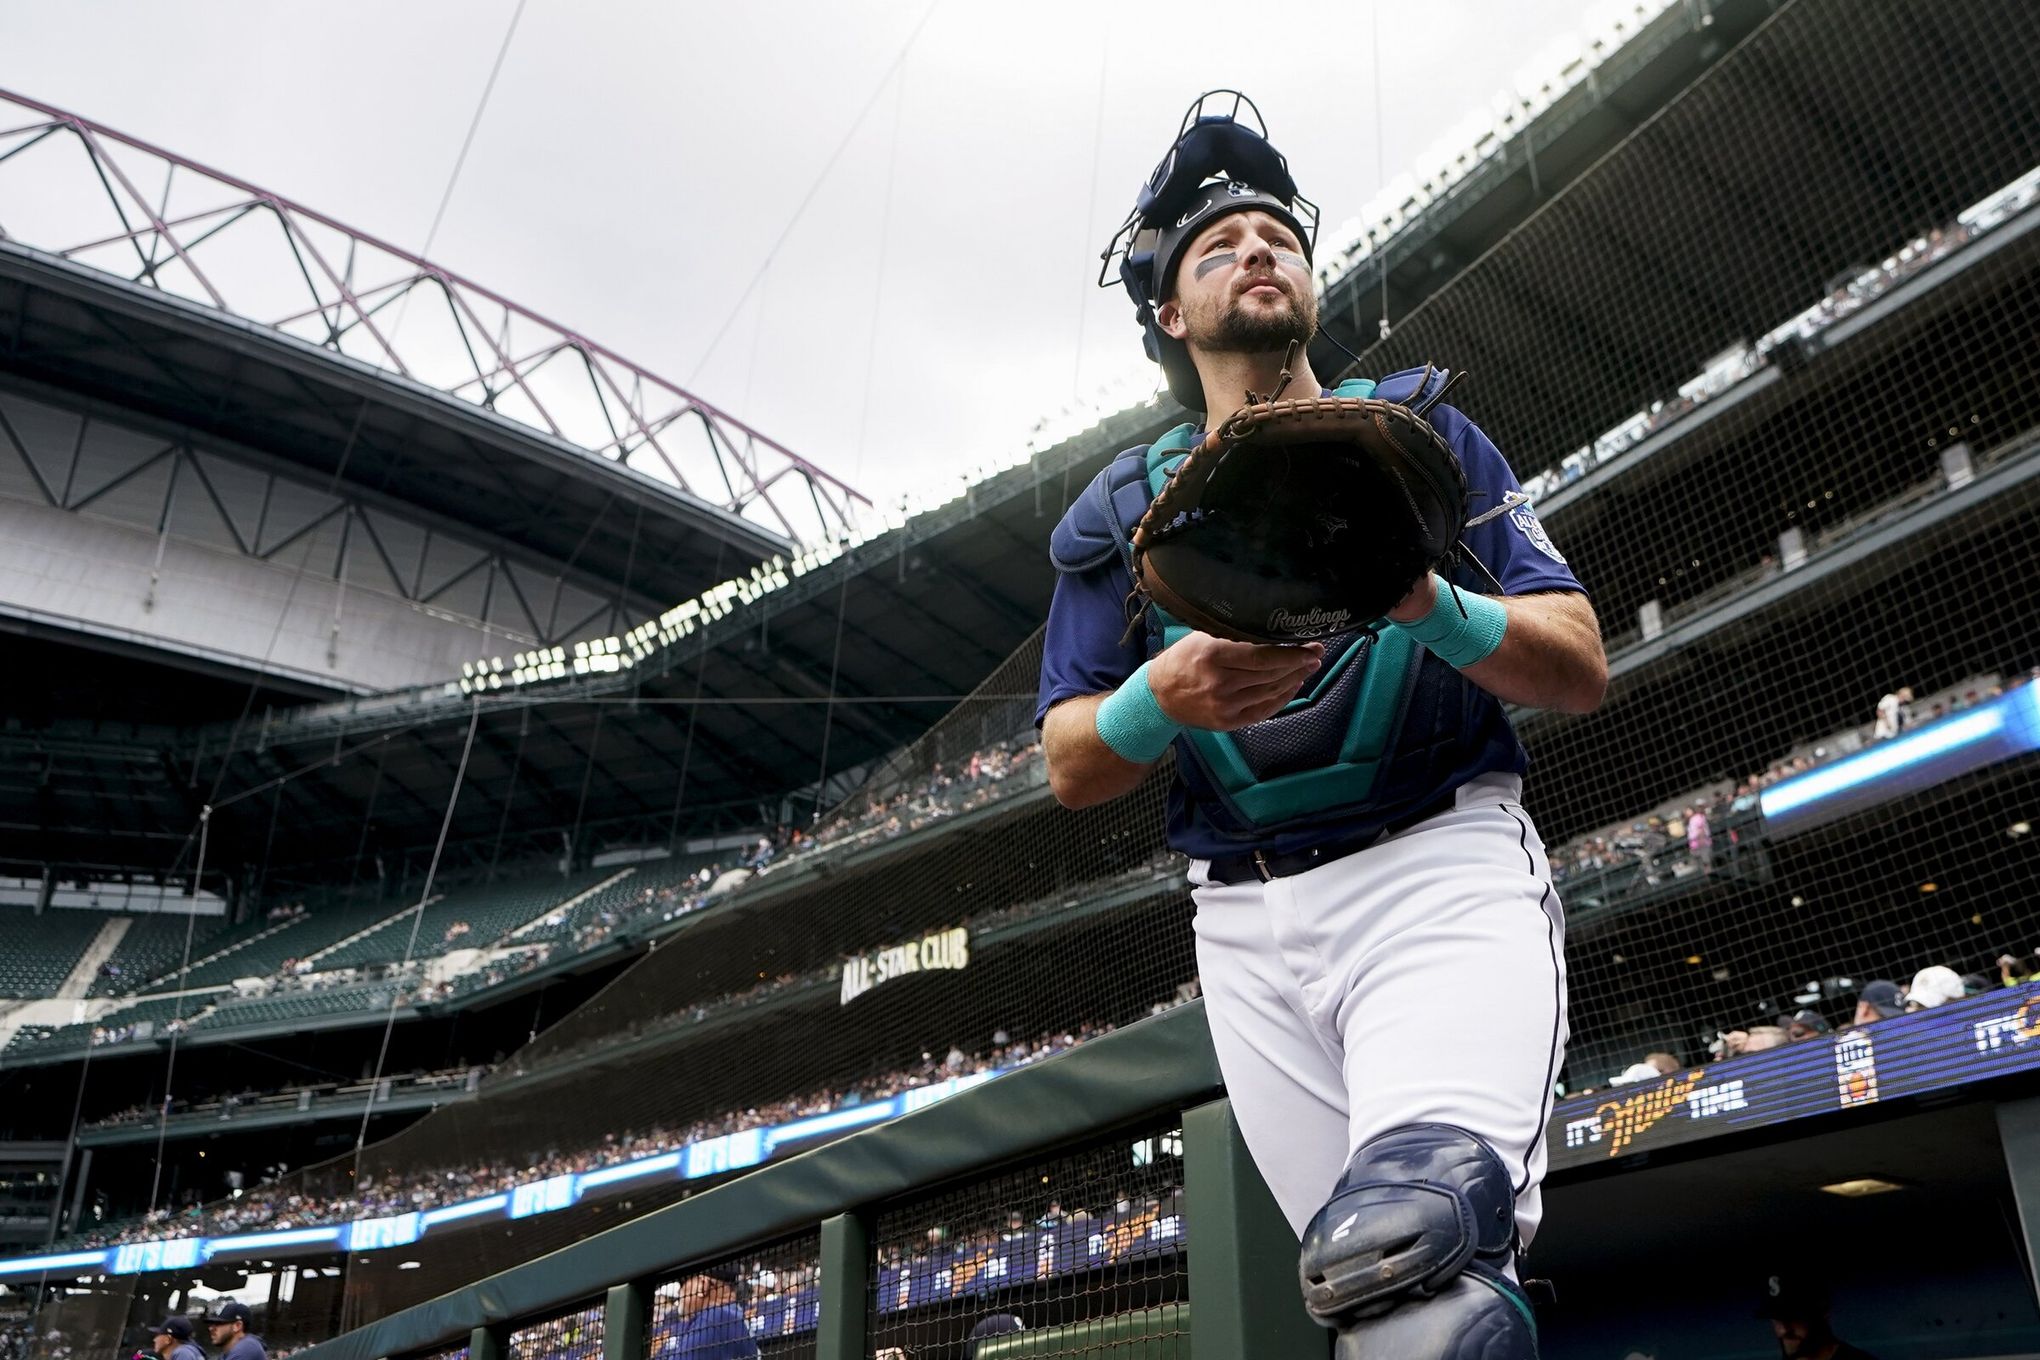 2021 Mariners capitalize on luck, clutch performance and